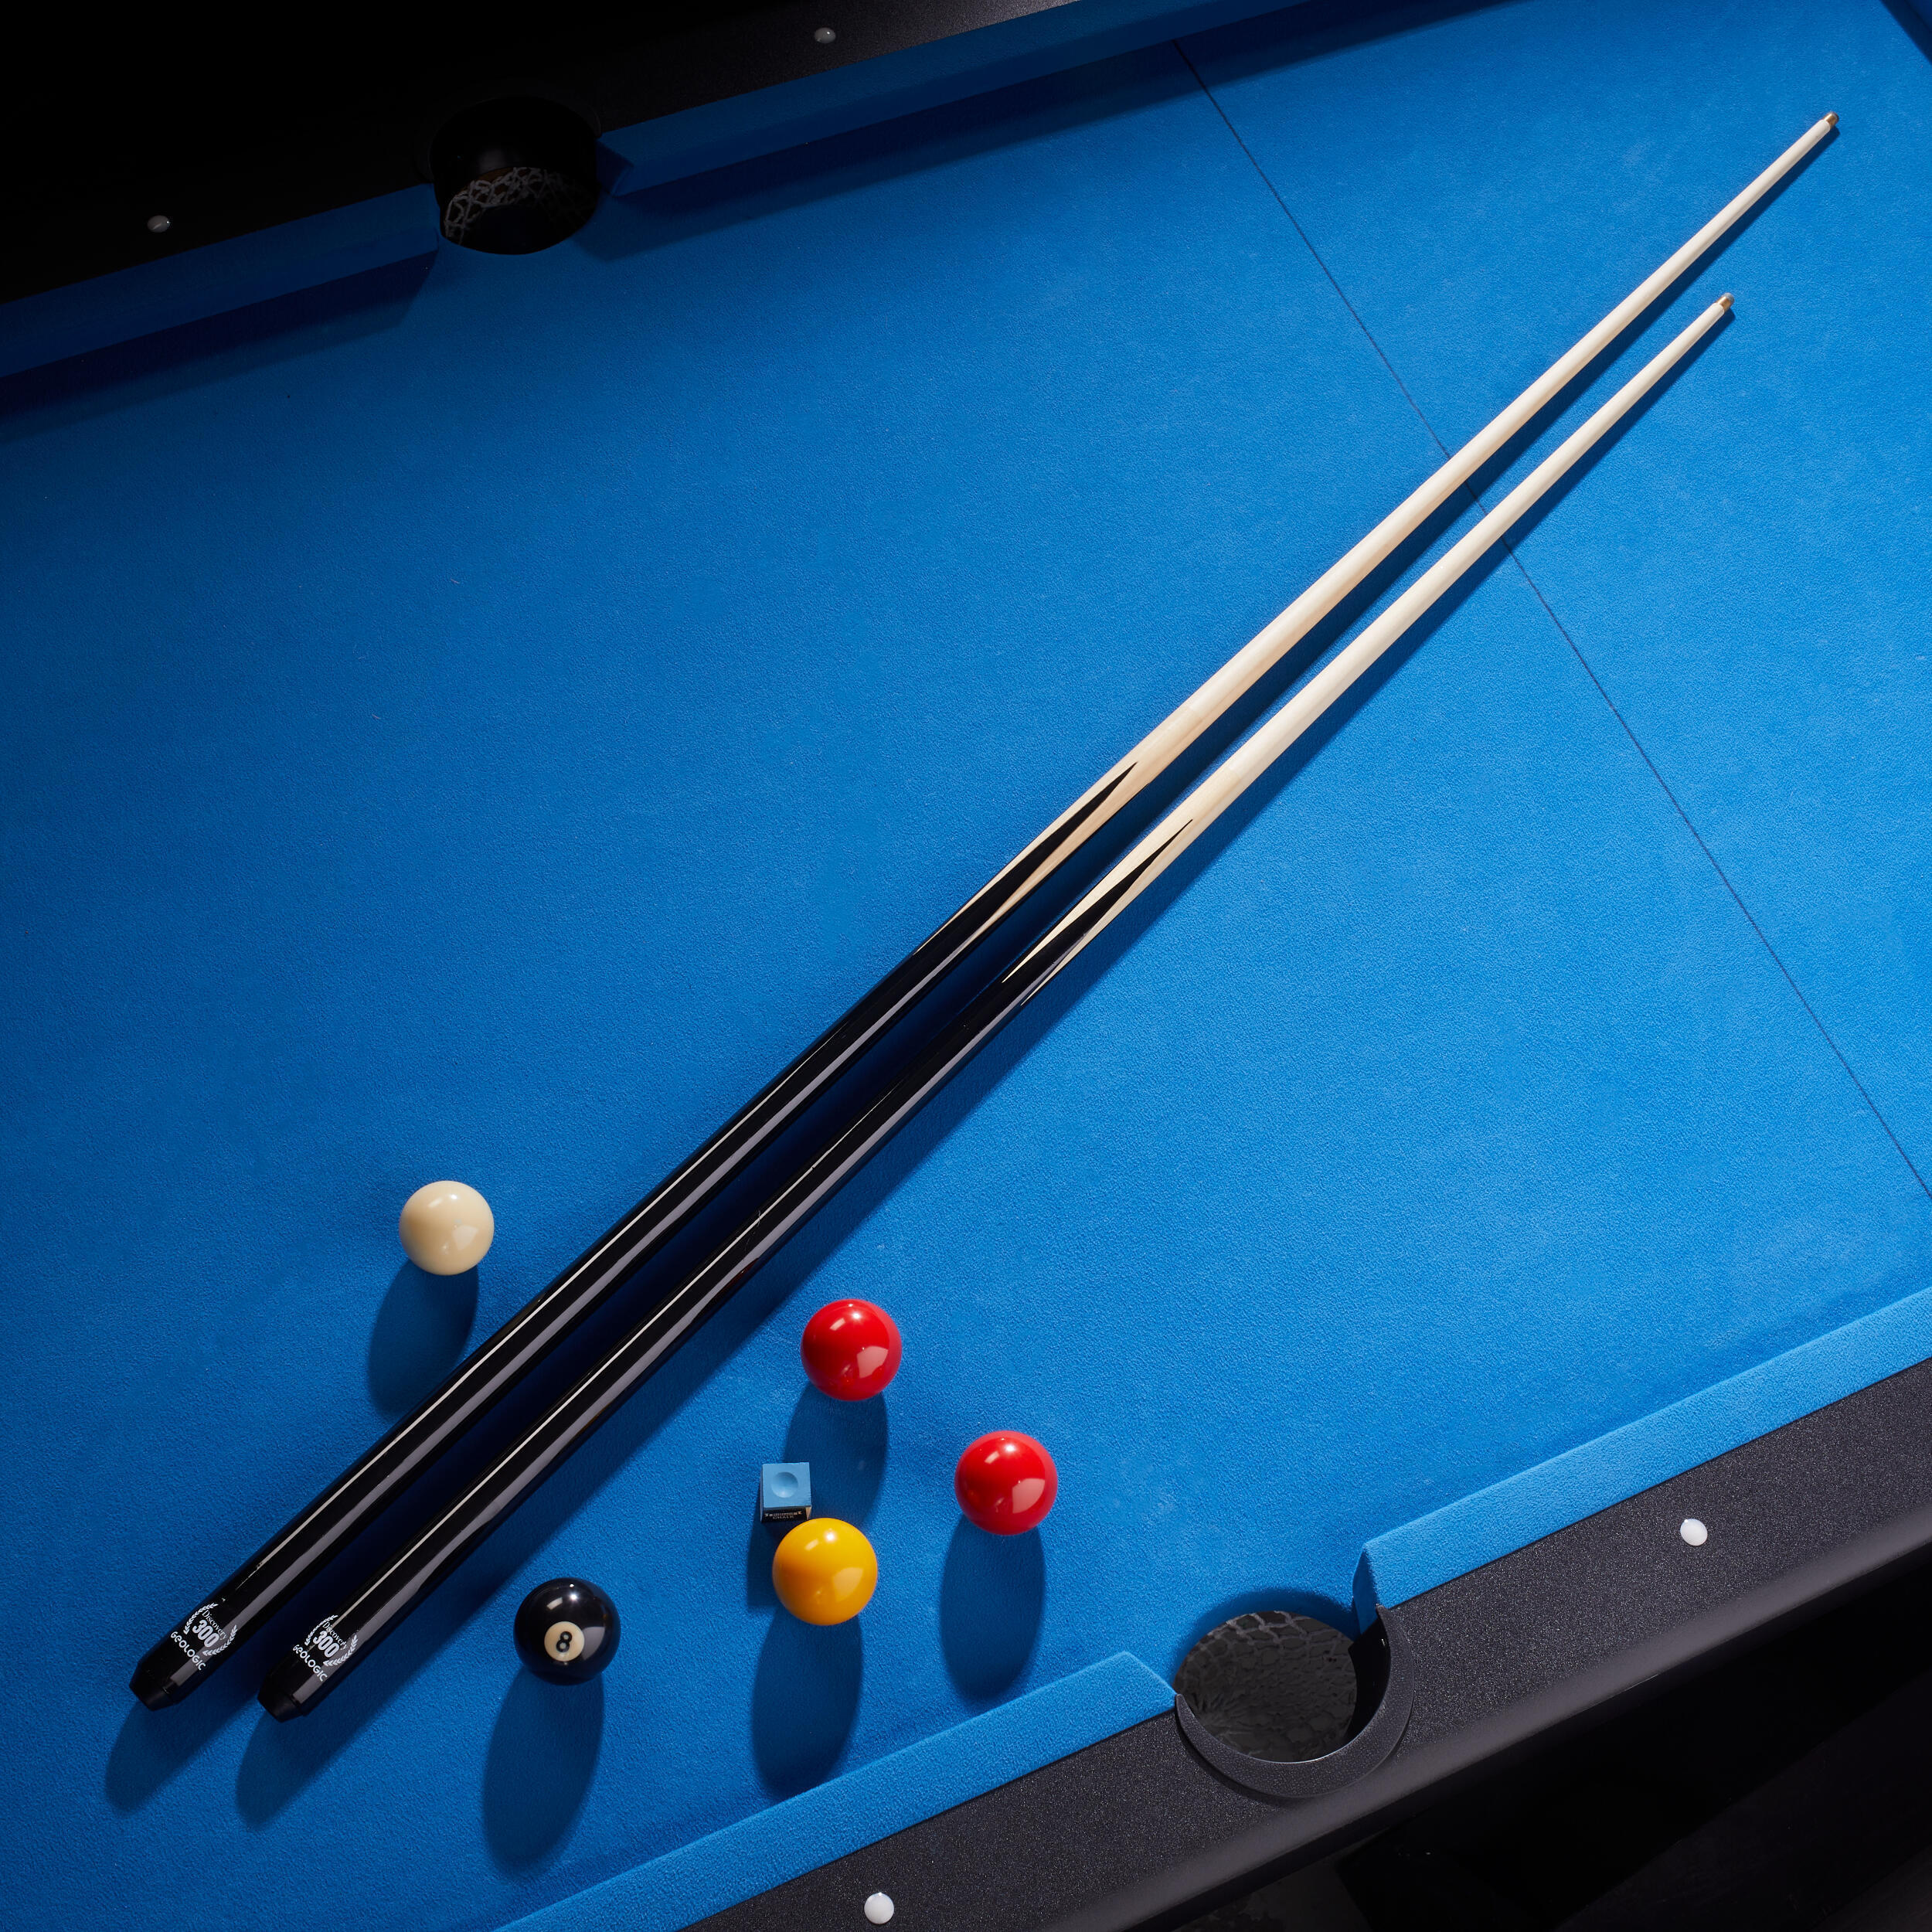 Looking after your decathlon pool cue